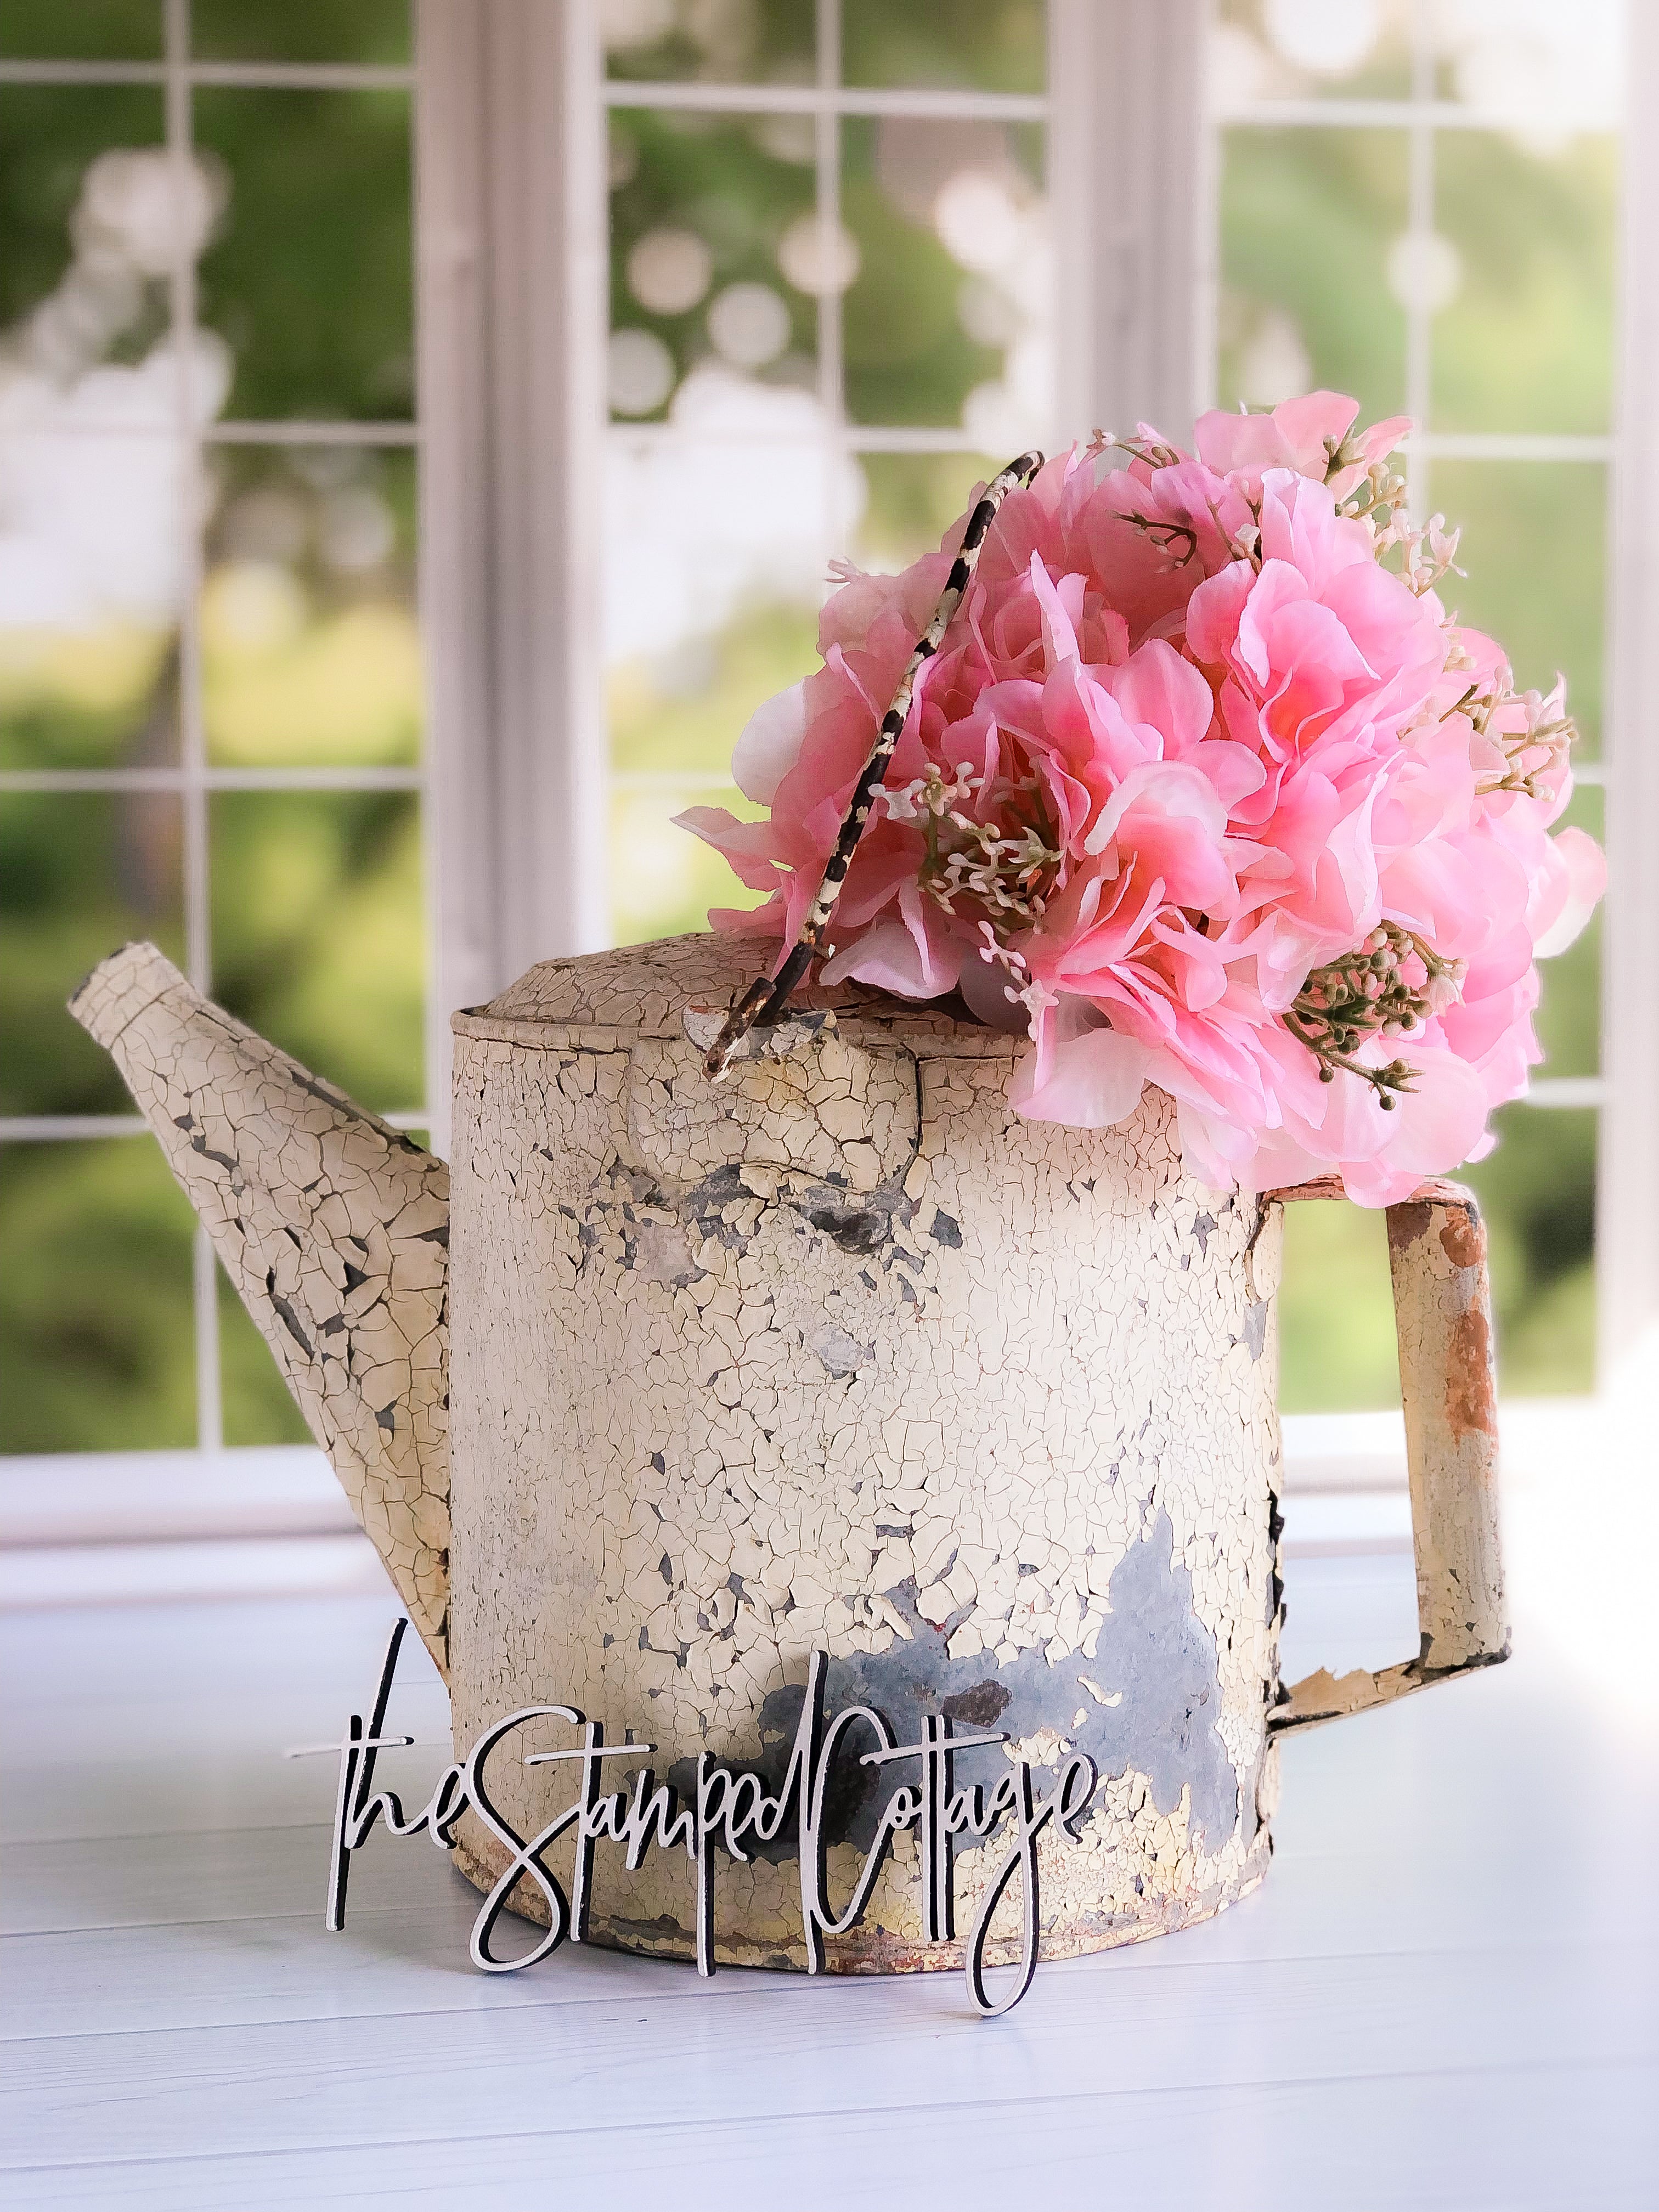 Gorgeous Chippy Galvanized Watering Can With Faux Florals – The Stamped  Cottage